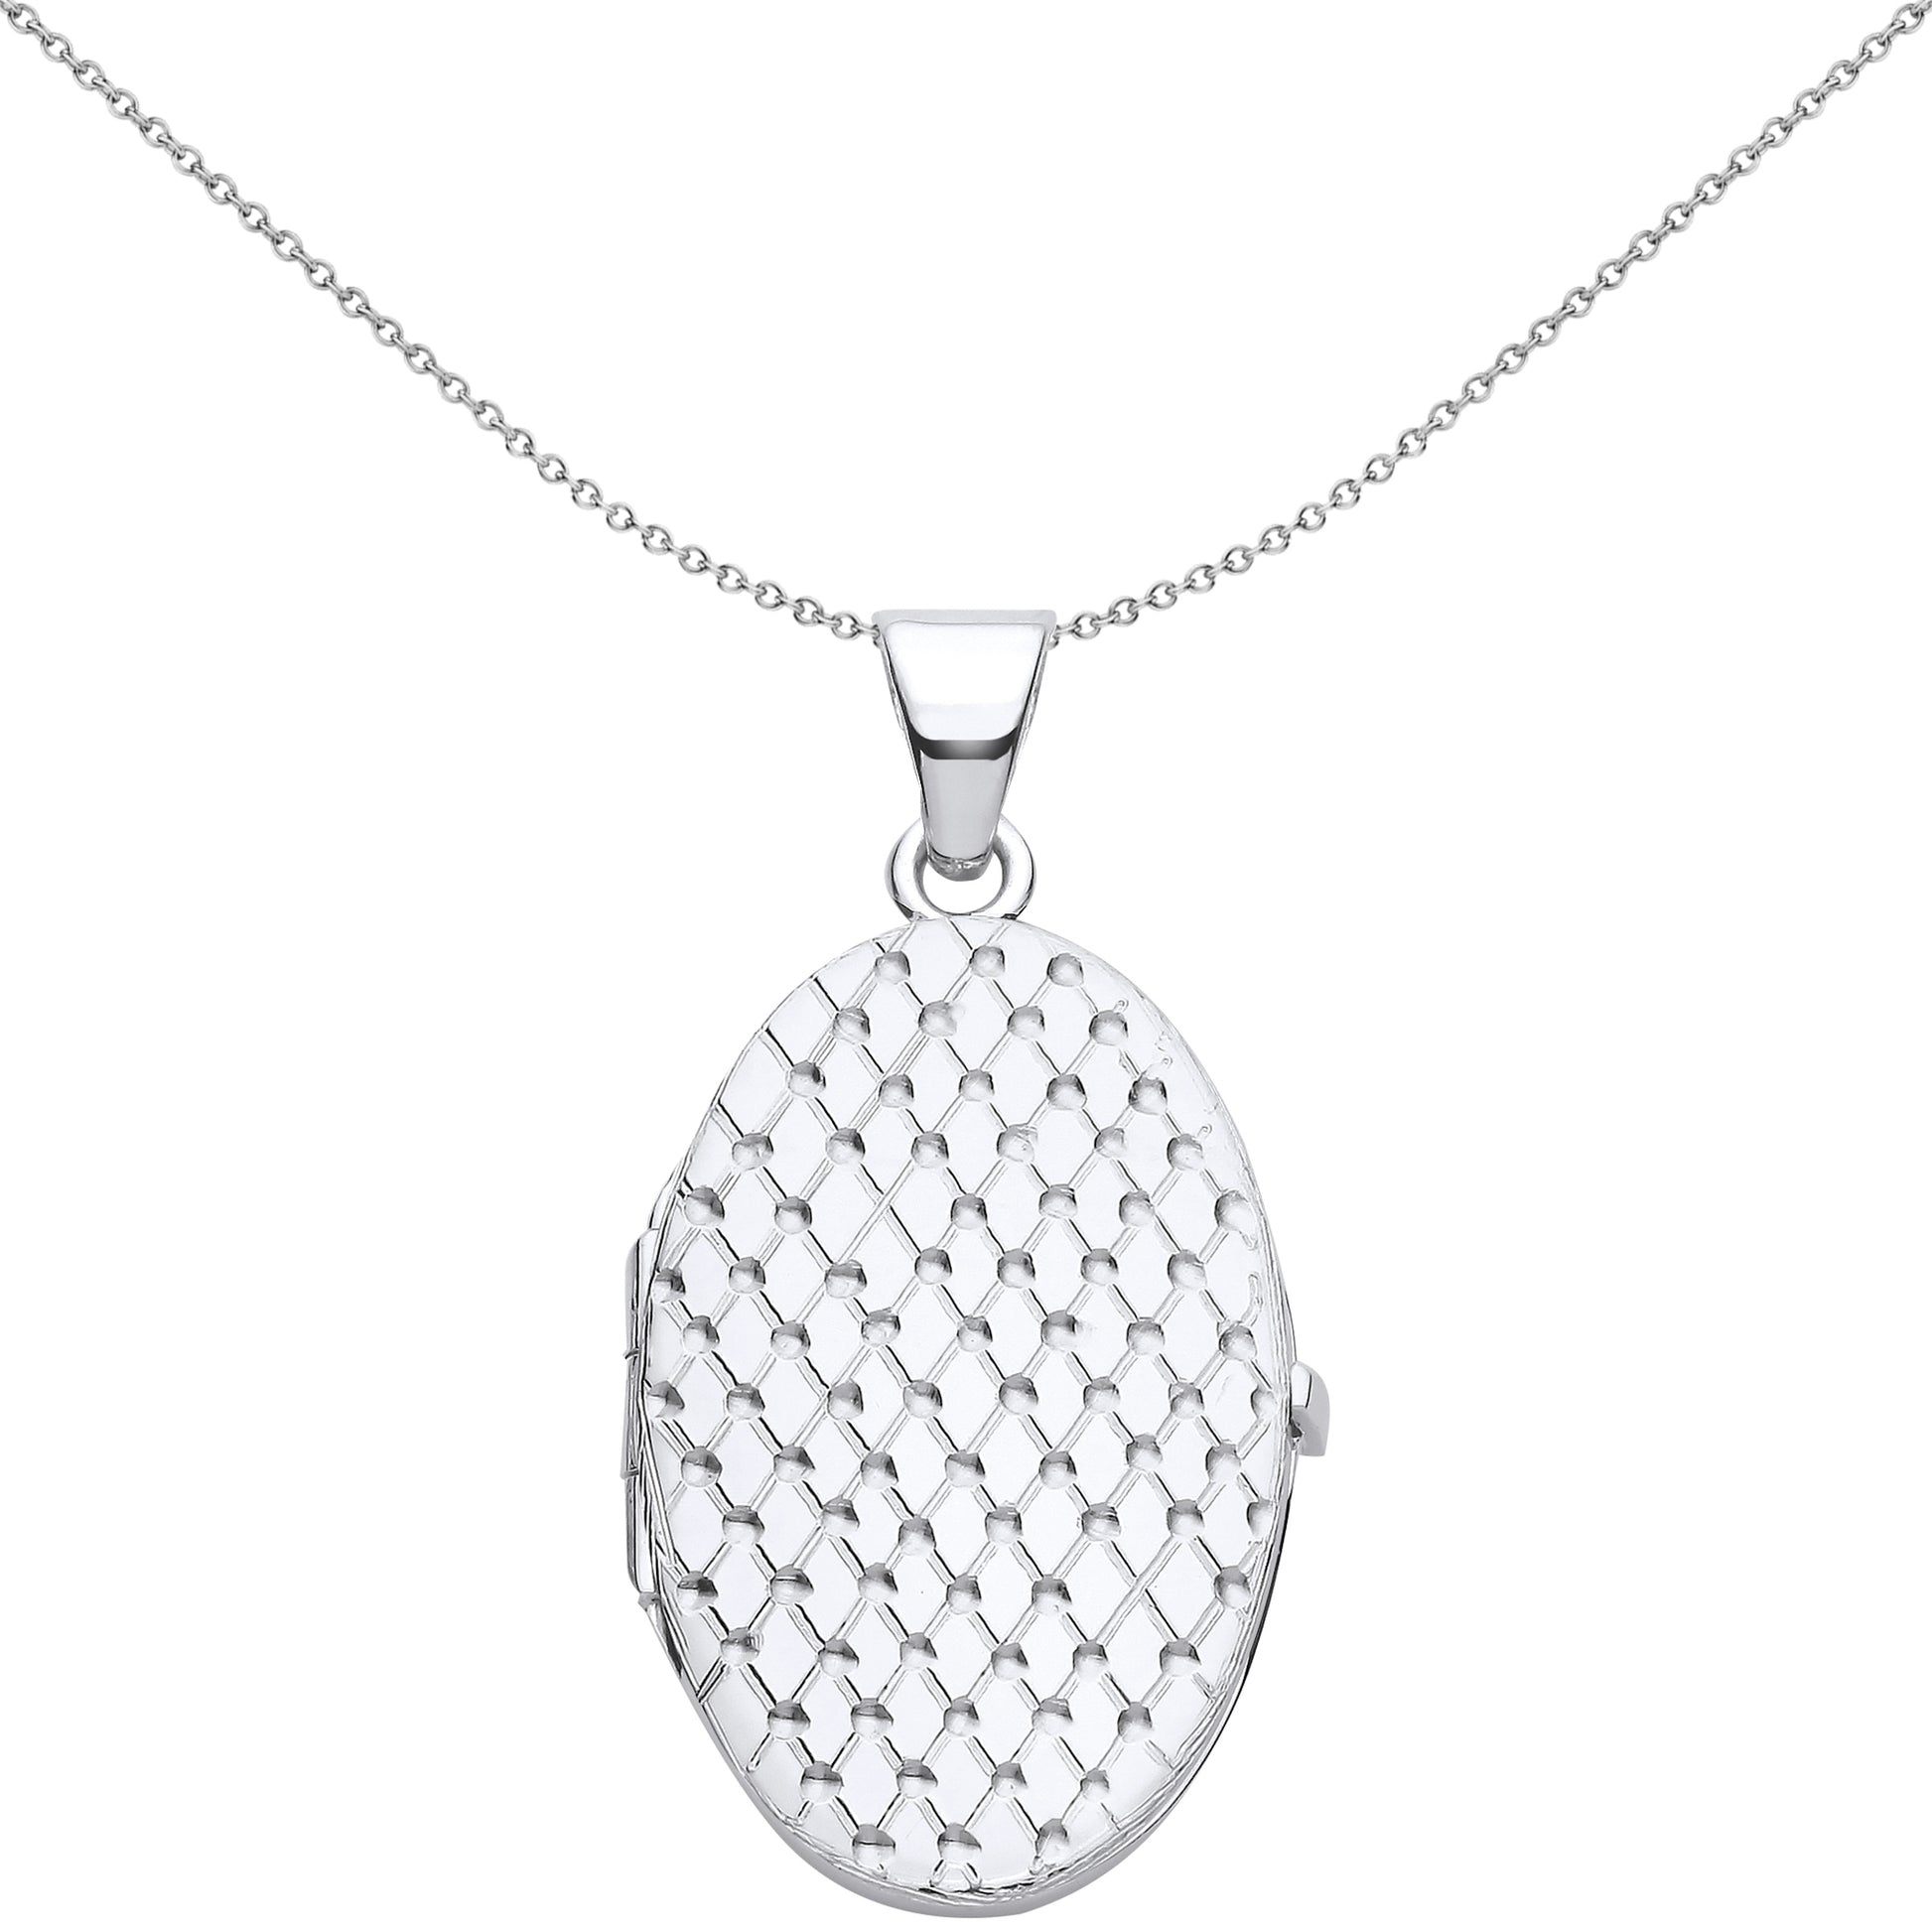 Silver  Engraved Diamond Quilted Mesh Oval Locket Pendant Necklace - LK65